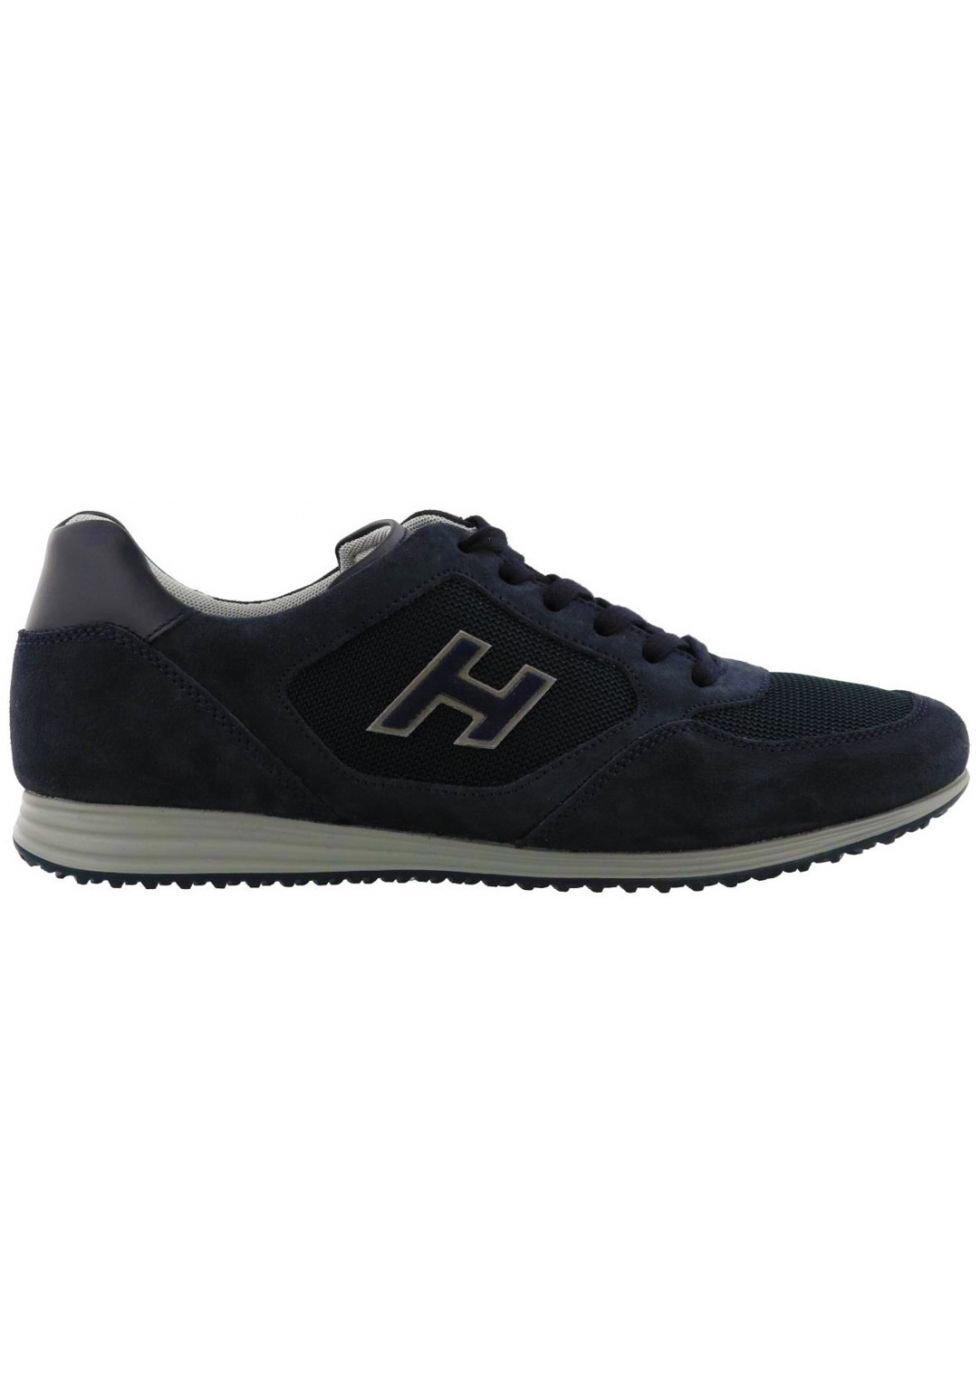 Hogan Men's fashion round toe sneakers shoes in blue leather with logo ...